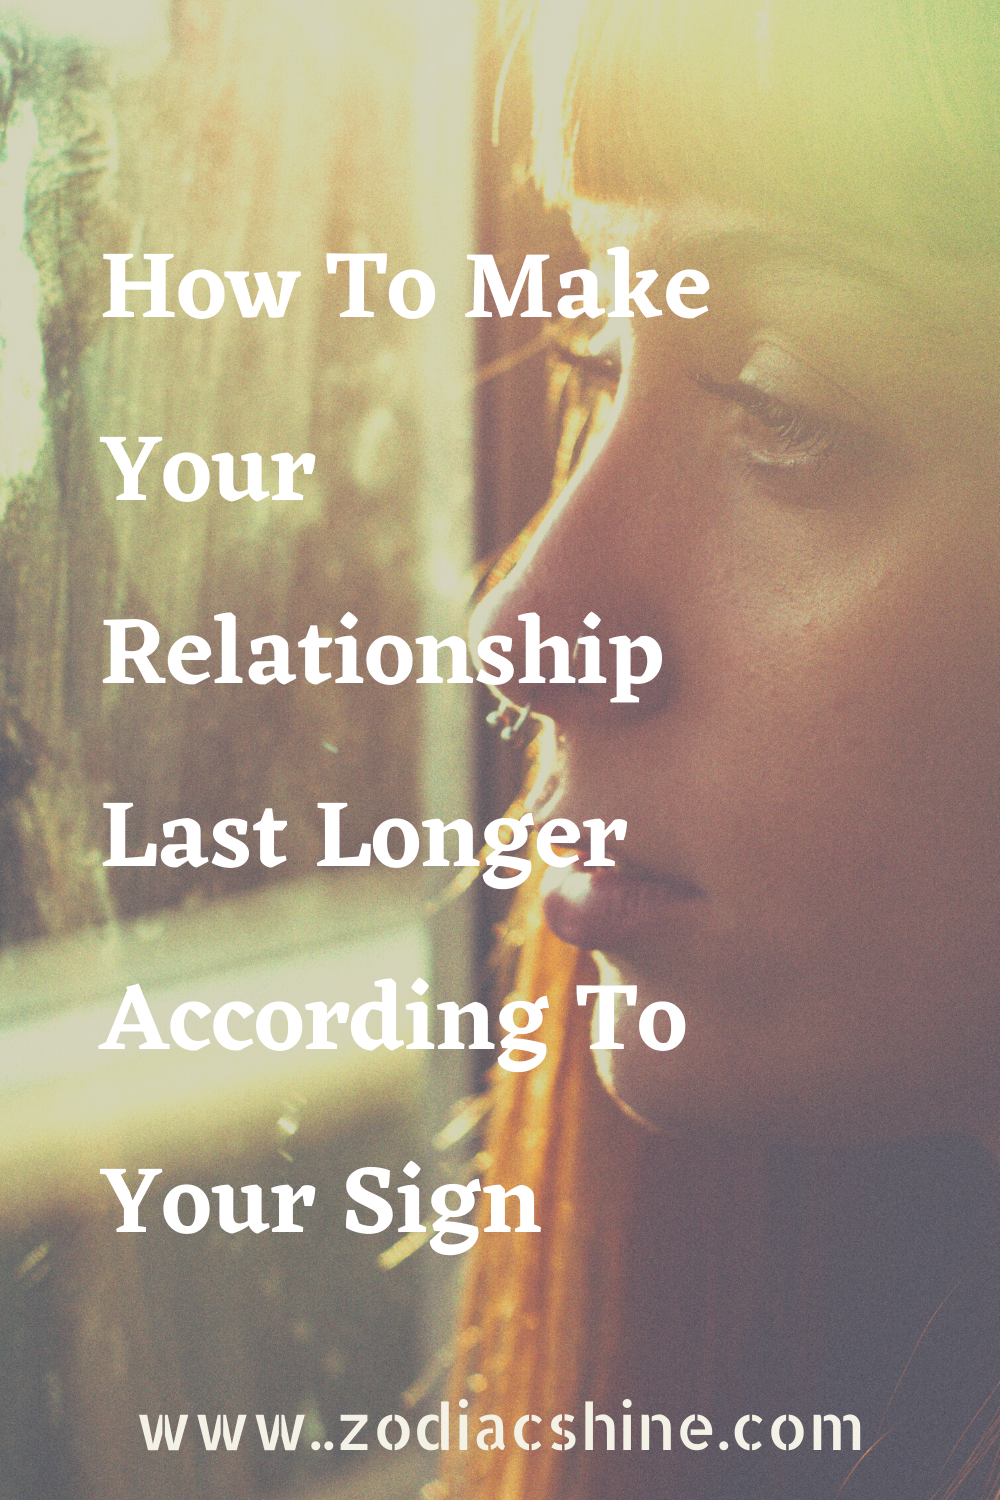 How To Make Your Relationship Last Longer According To Your Sign